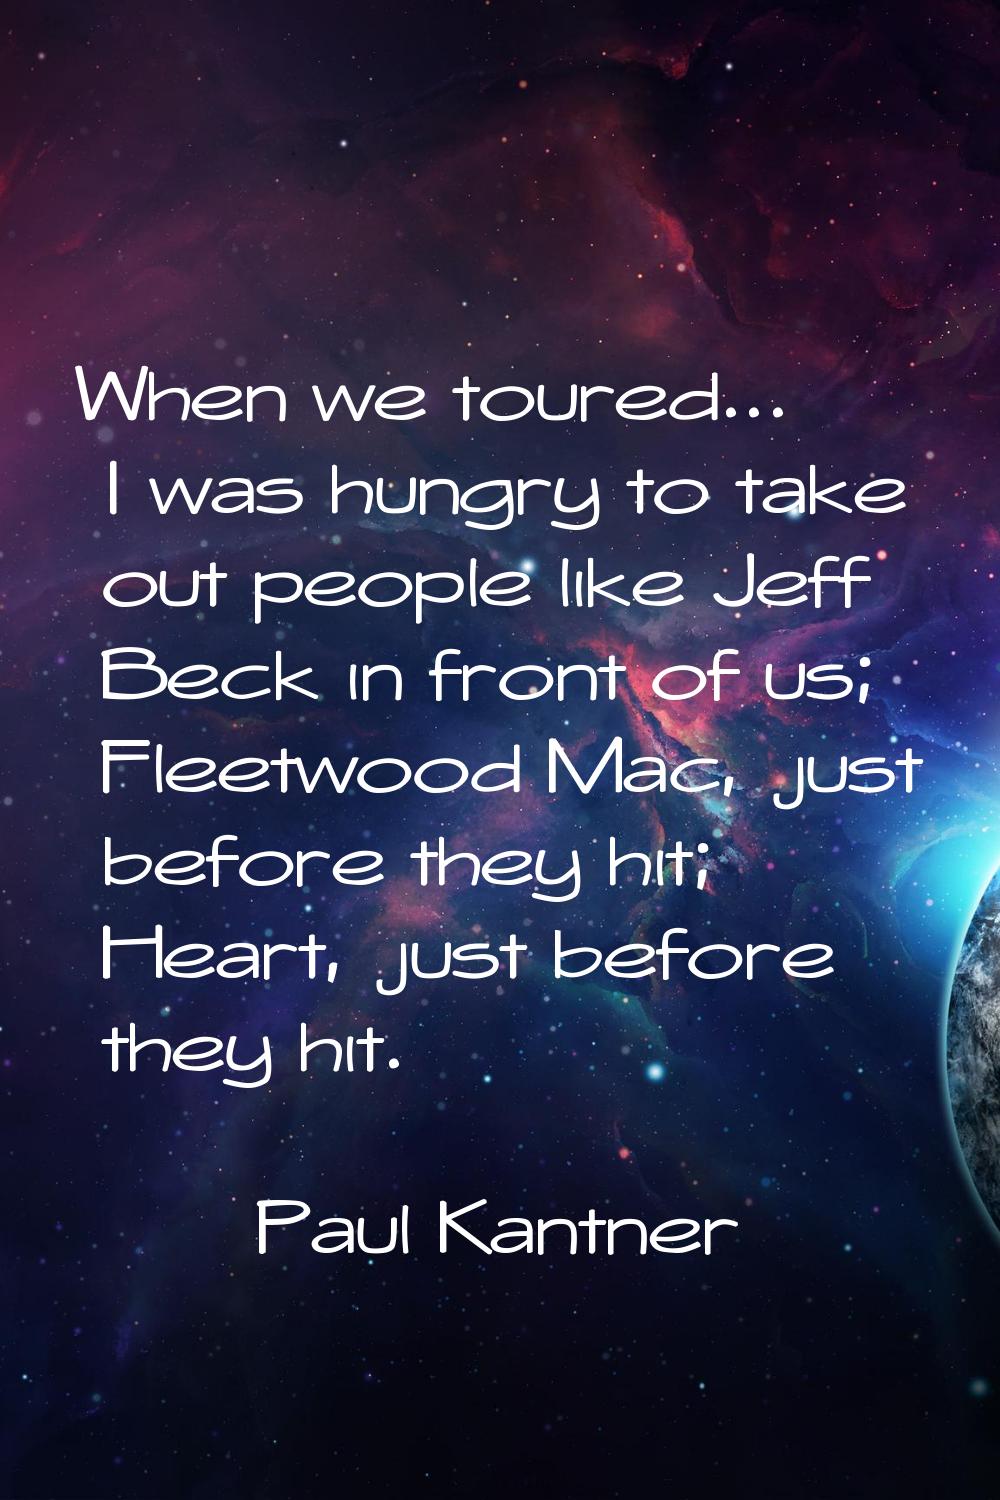 When we toured... I was hungry to take out people like Jeff Beck in front of us; Fleetwood Mac, jus